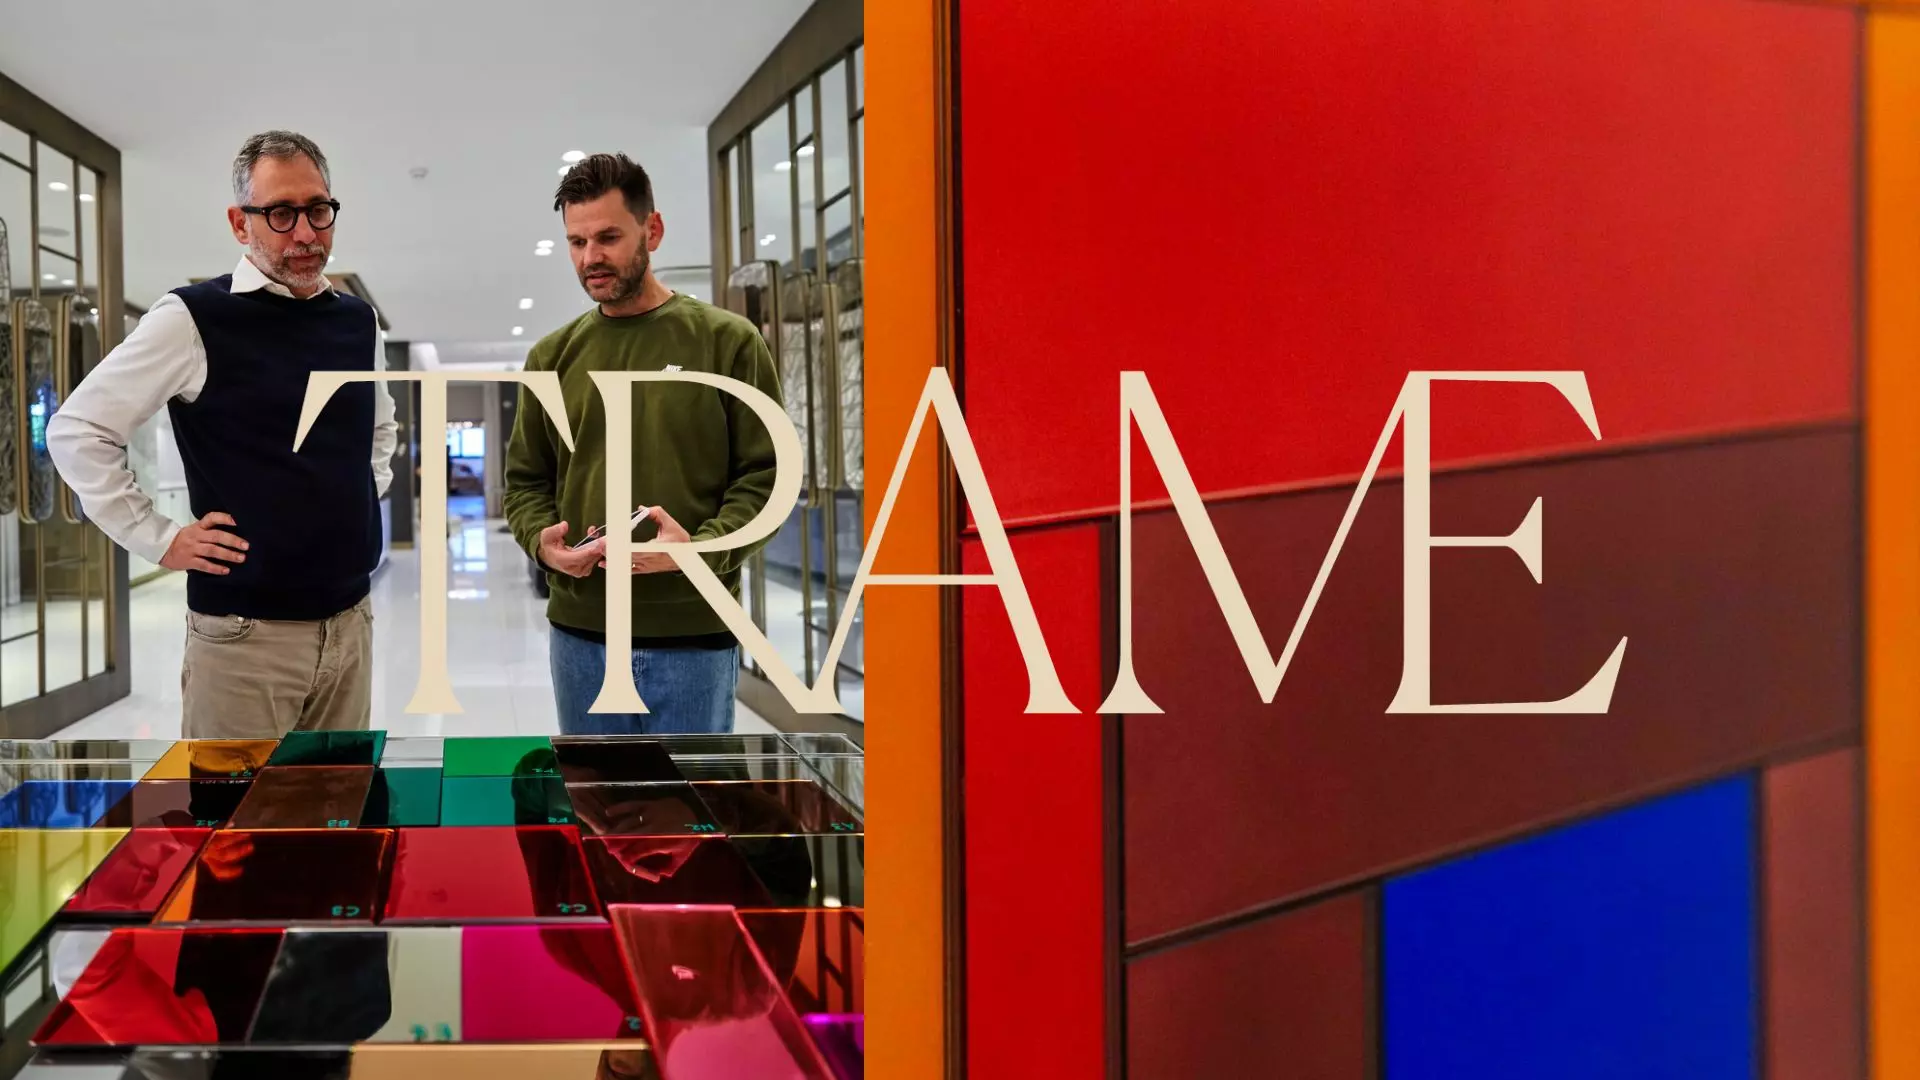 Photos of TRAME artists Jeff Davis and Martin Grasser with their latest displays and the TRAME logo.